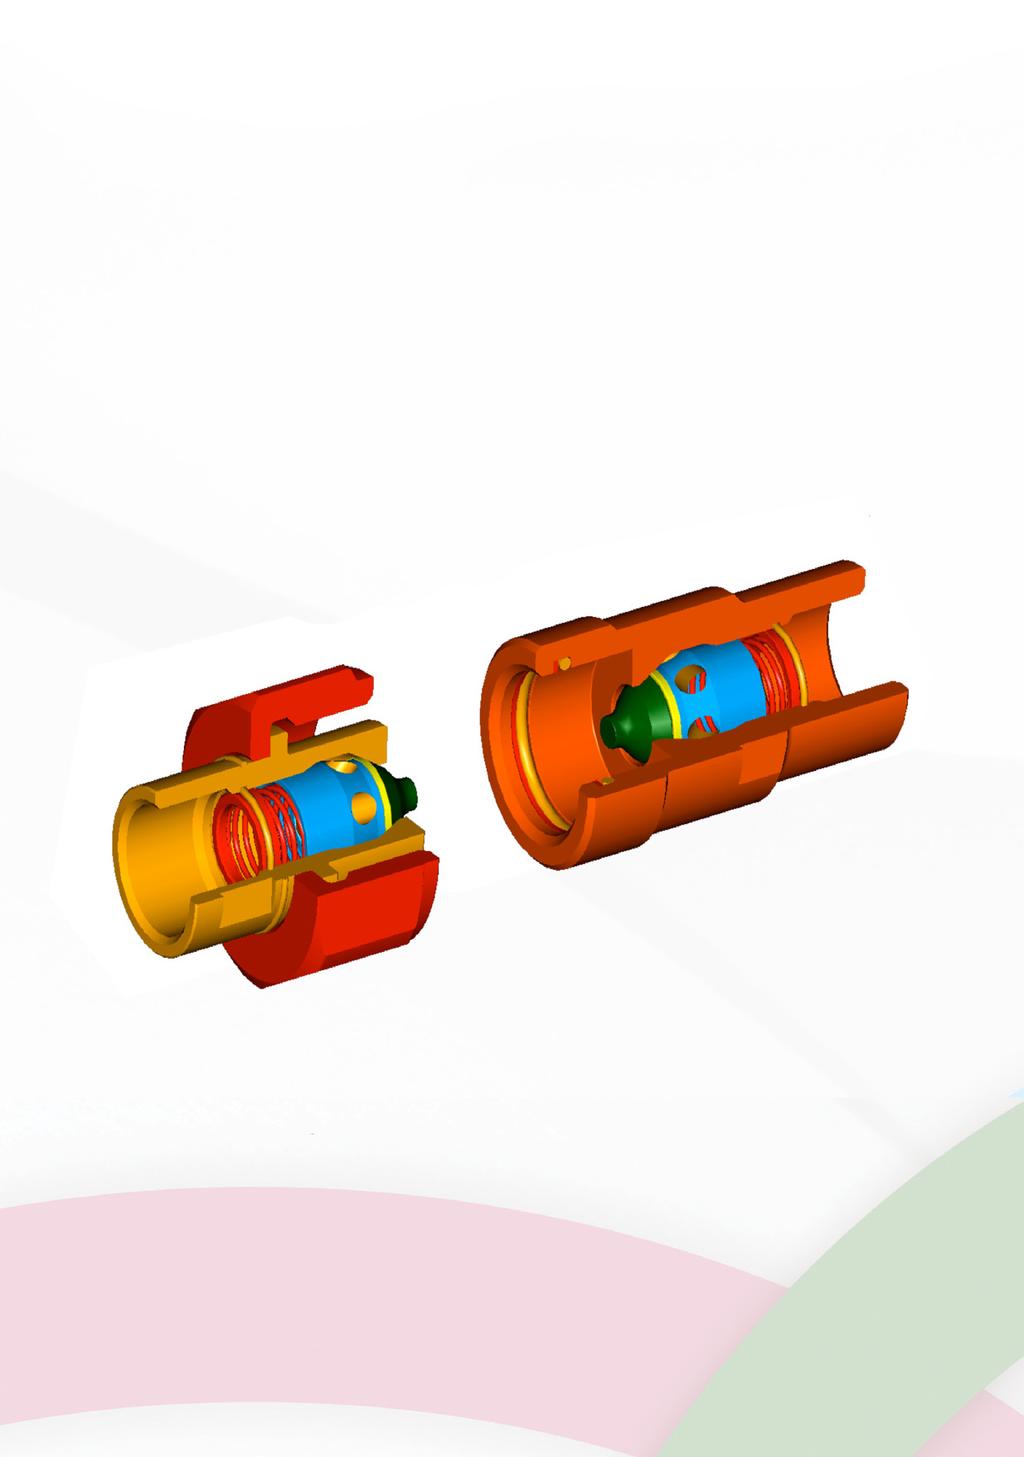 TECHNICAL FEATURES AND OPTIONS Interchangeability: Similar coupling Valve system: Poppet valve Mechanical connection: Screw system Connection system: Screw to connect Disconnection: Unscrew to